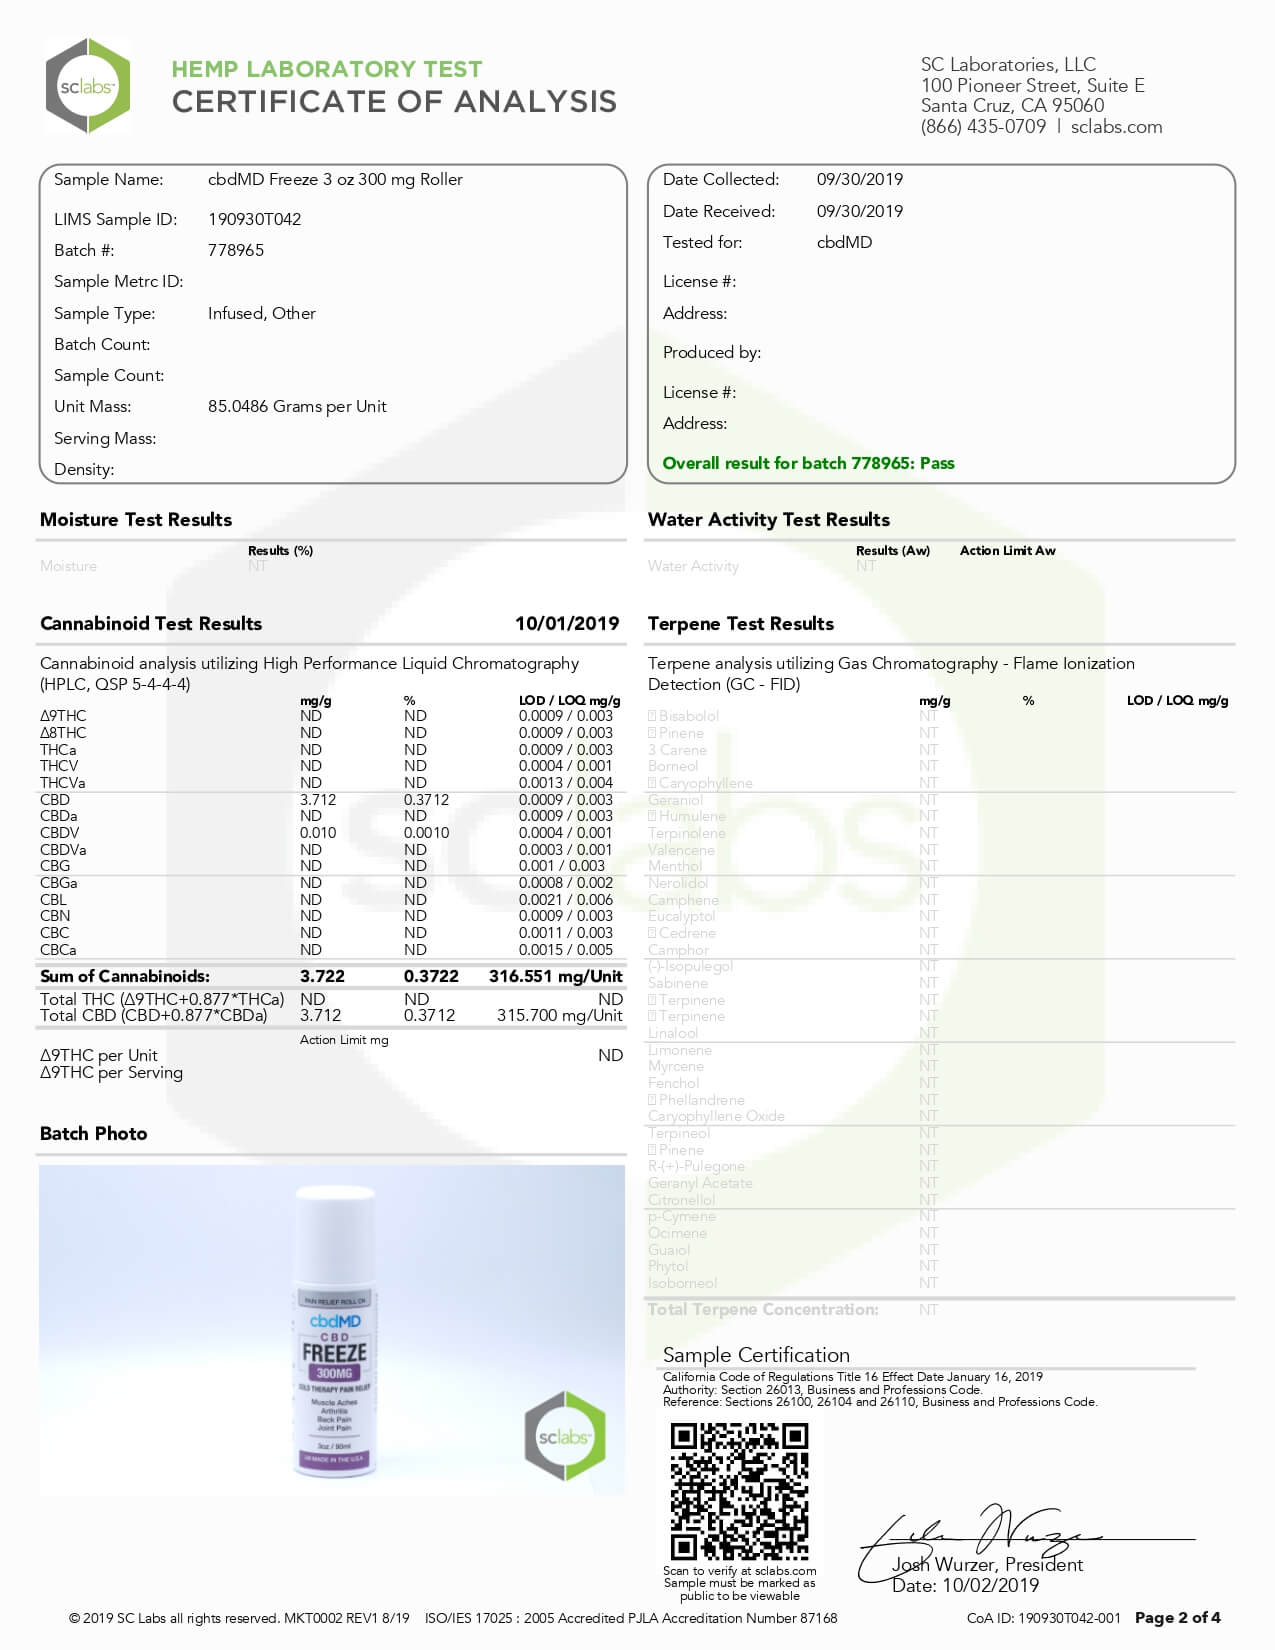 cbdMD CBD Topical Freeze Cold Therapy 3oz 300mg Lab Report